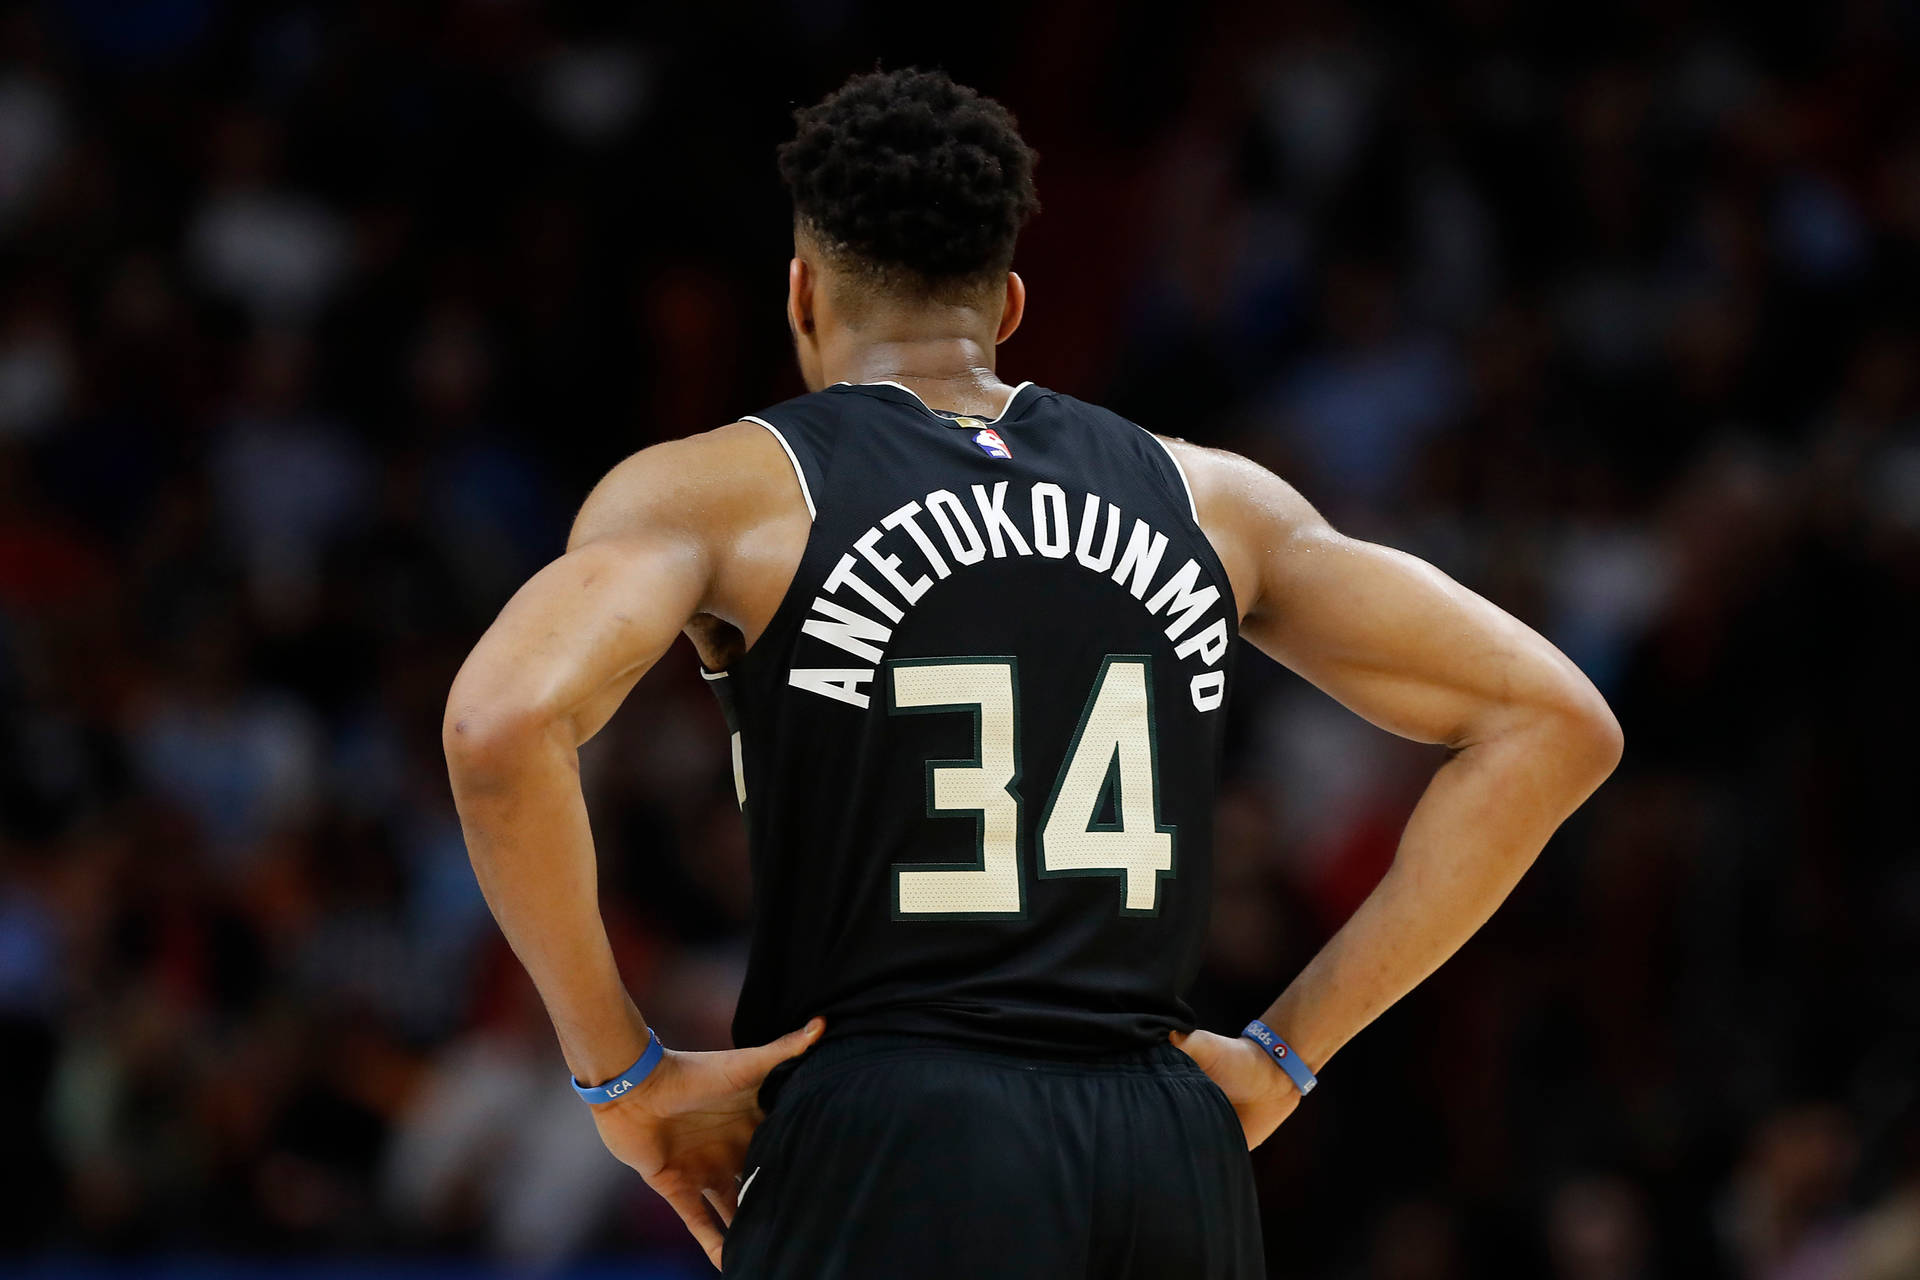 Giannis Antetokounmpo Jersey Number 34 Background